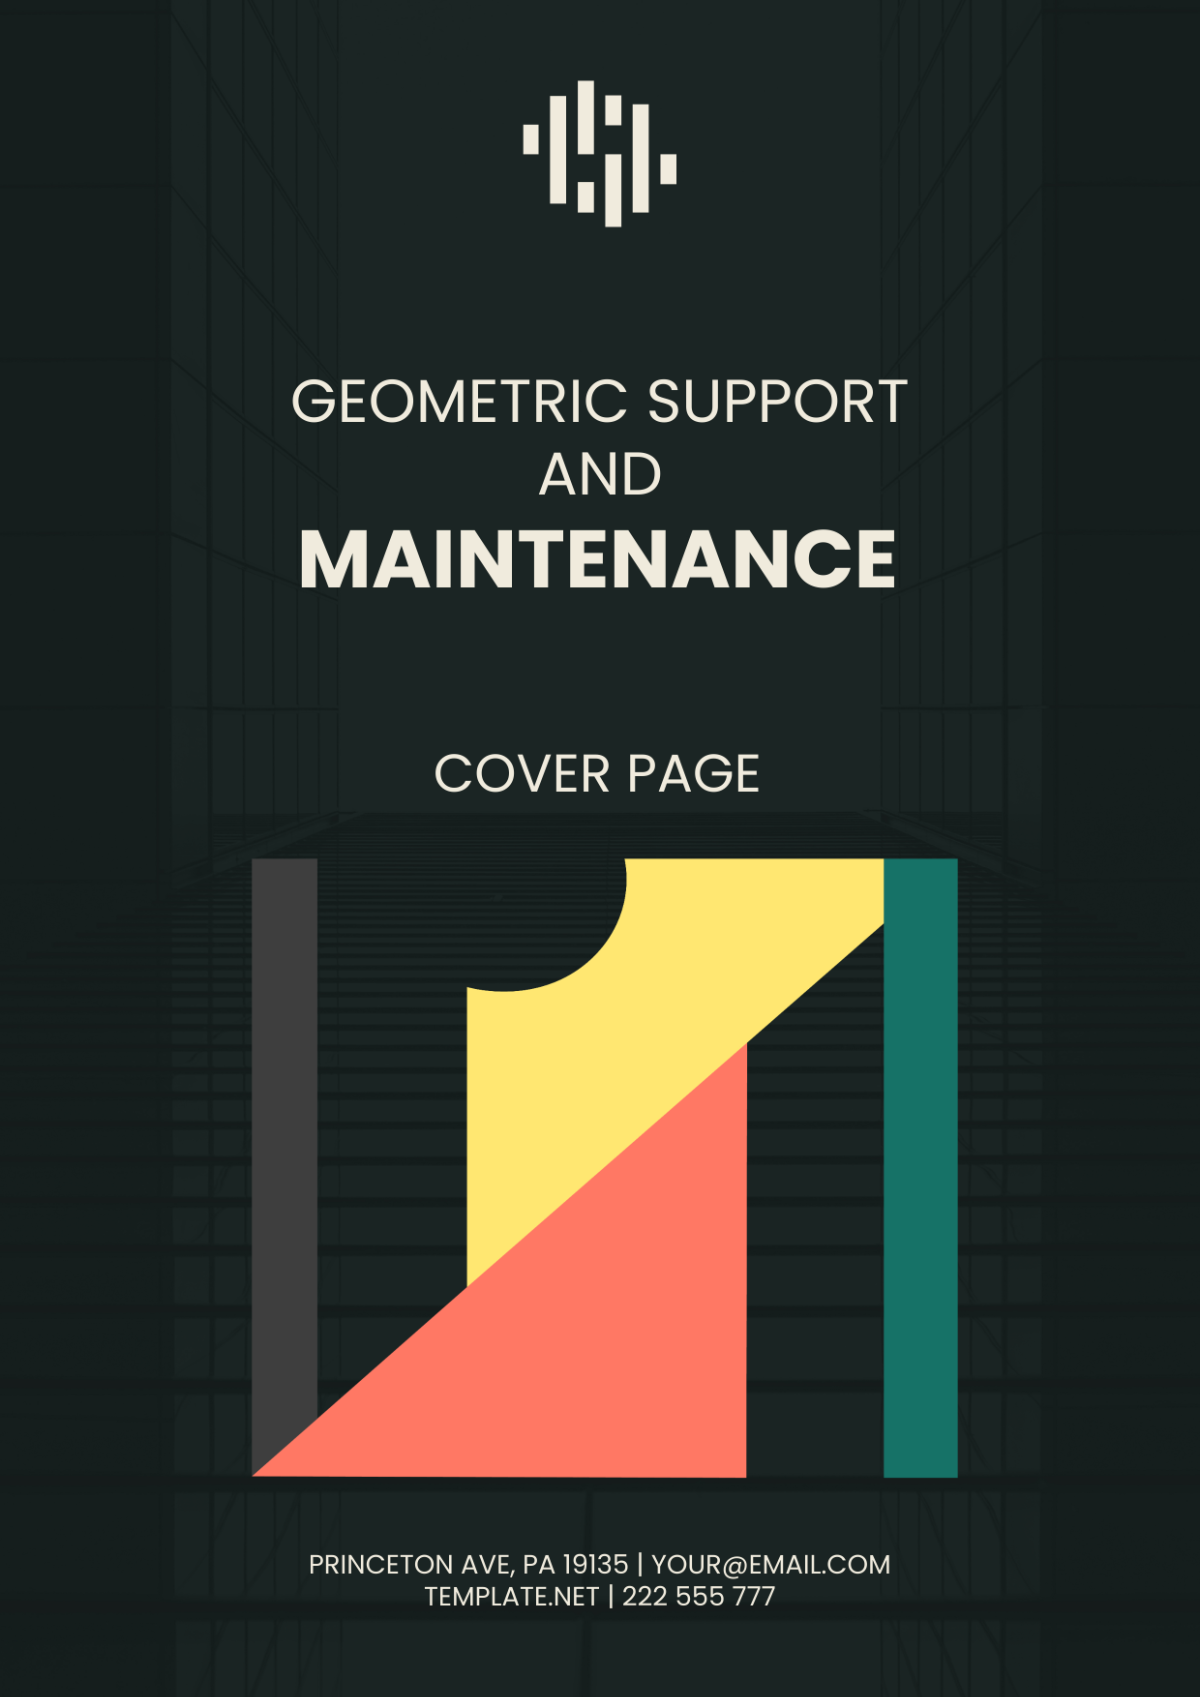 Geometric Support and Maintenance Cover Page Template